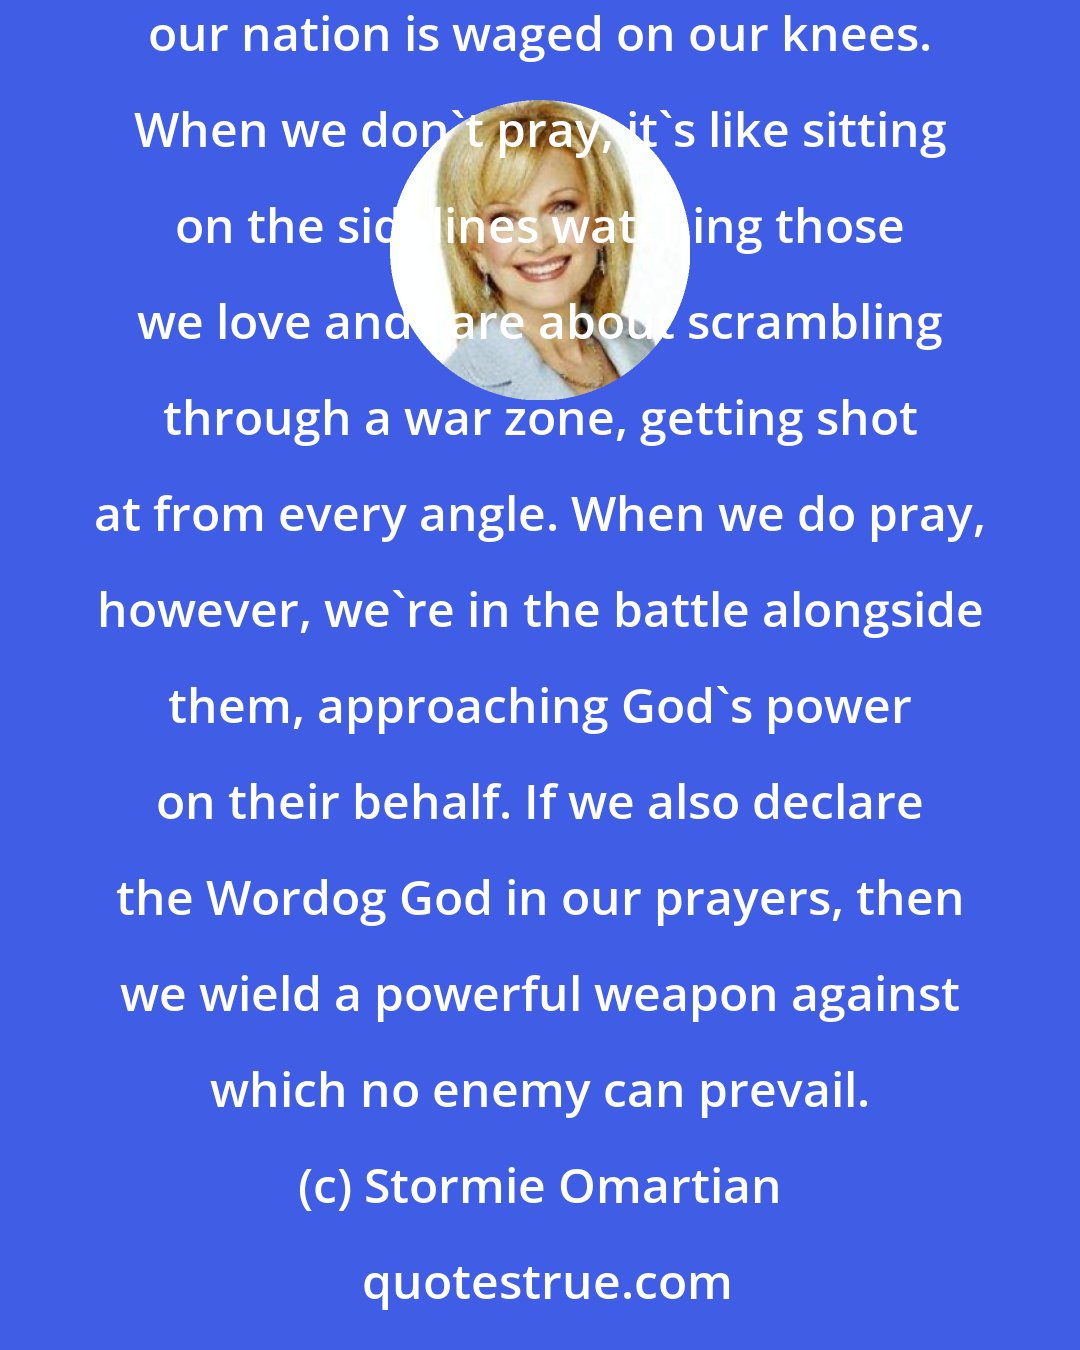 Stormie Omartian: The battle for our lives, and the lives and souls of our children, our husbands, our friends, our families, our neighbors, and our nation is waged on our knees. When we don't pray, it's like sitting on the sidelines watching those we love and care about scrambling through a war zone, getting shot at from every angle. When we do pray, however, we're in the battle alongside them, approaching God's power on their behalf. If we also declare the Wordog God in our prayers, then we wield a powerful weapon against which no enemy can prevail.